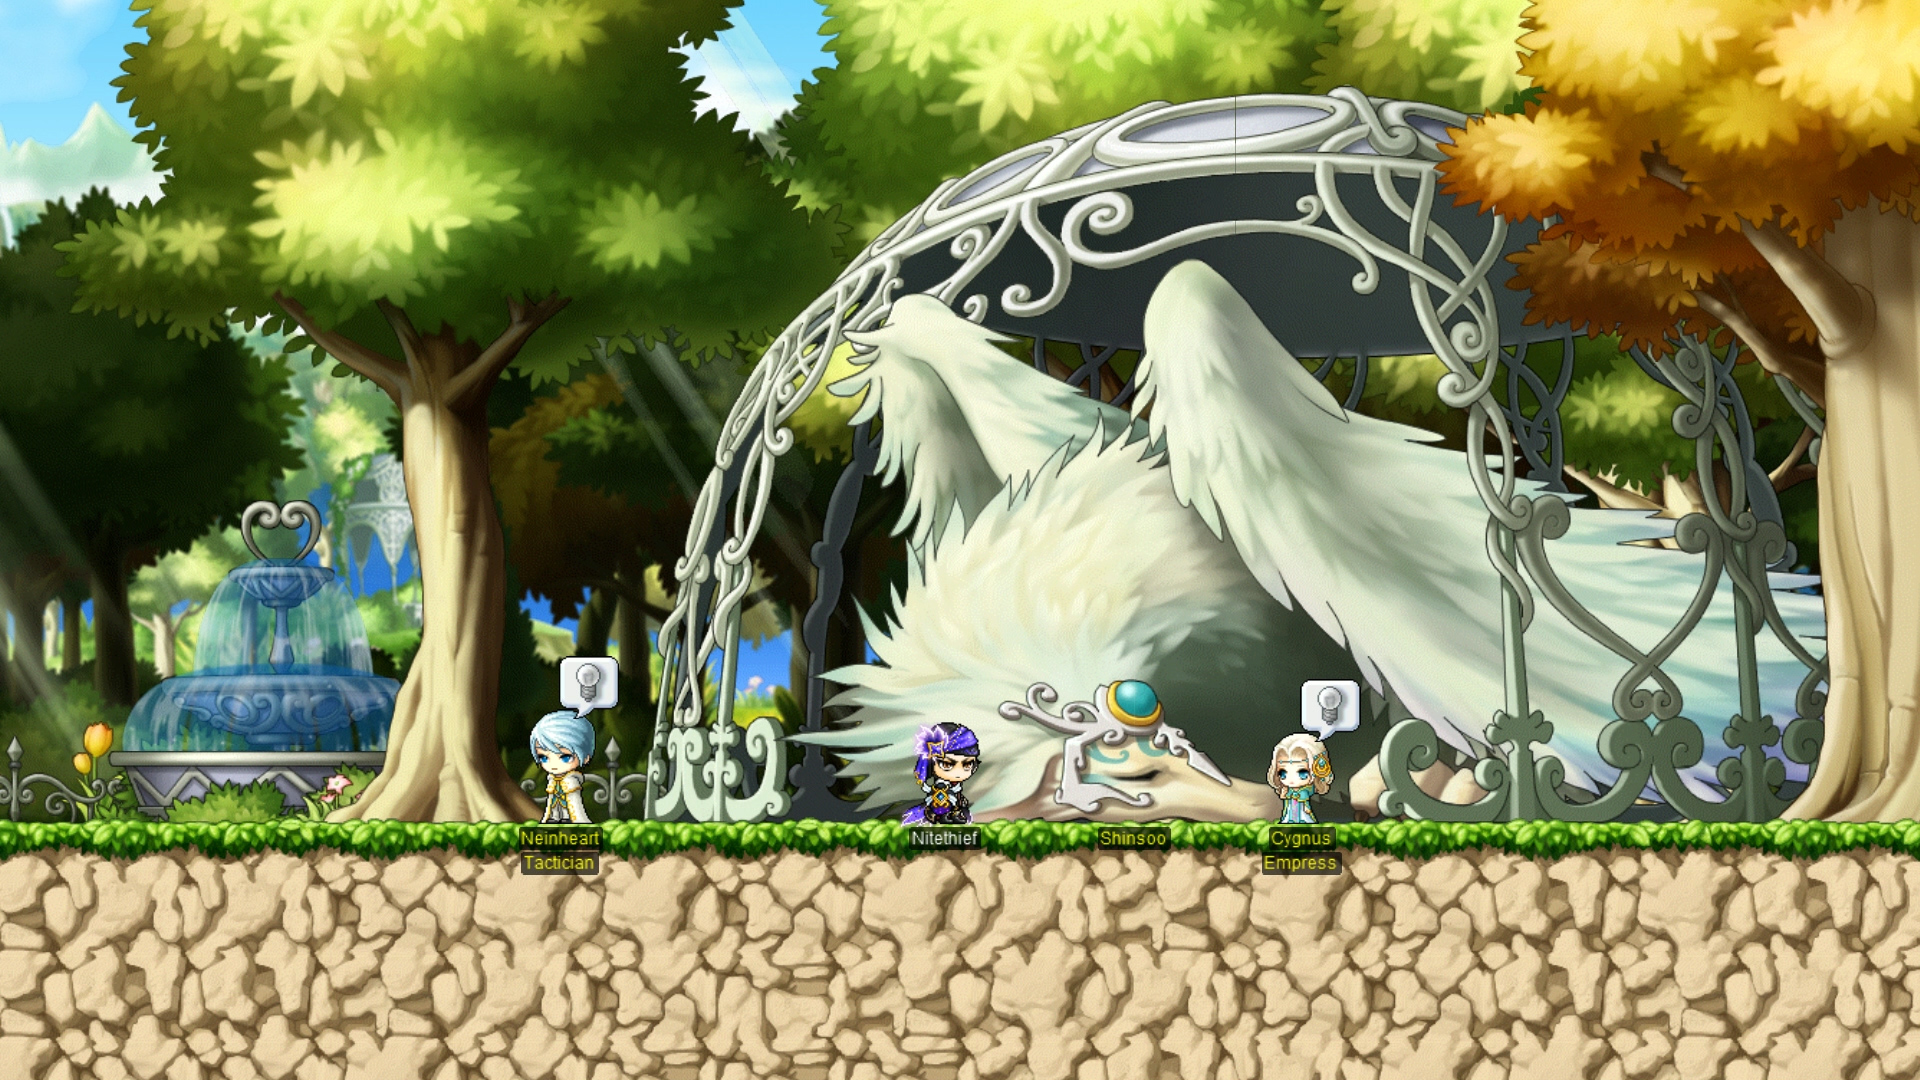 Official MapleStory Backgrounds  Official MapleStory Website